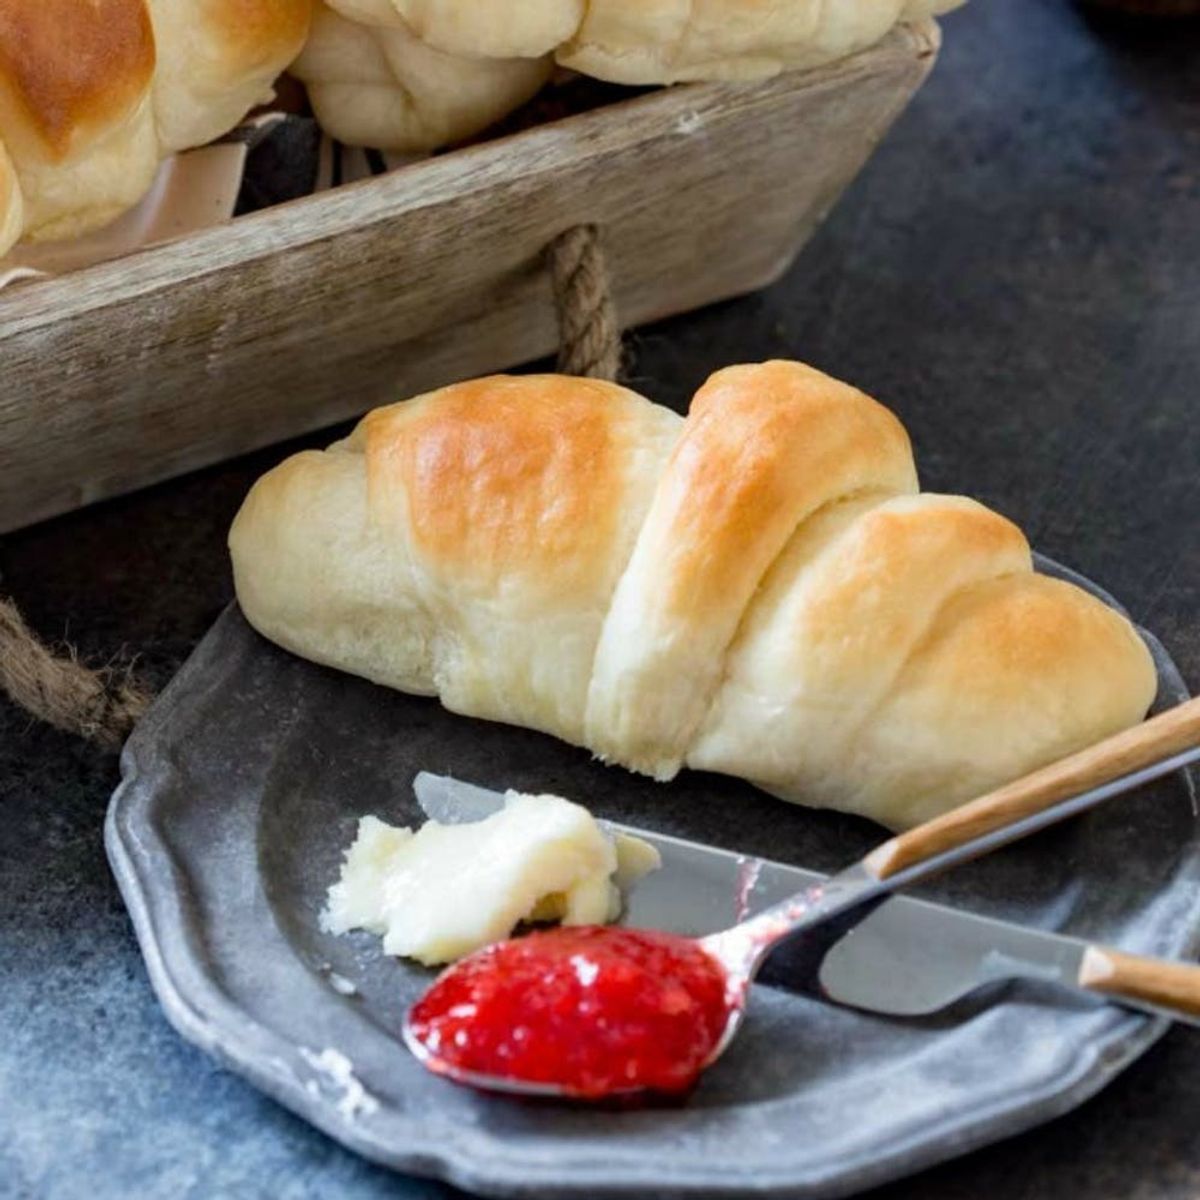 13 Biscuit, Roll, and Breadstick Recipes for Any Meal